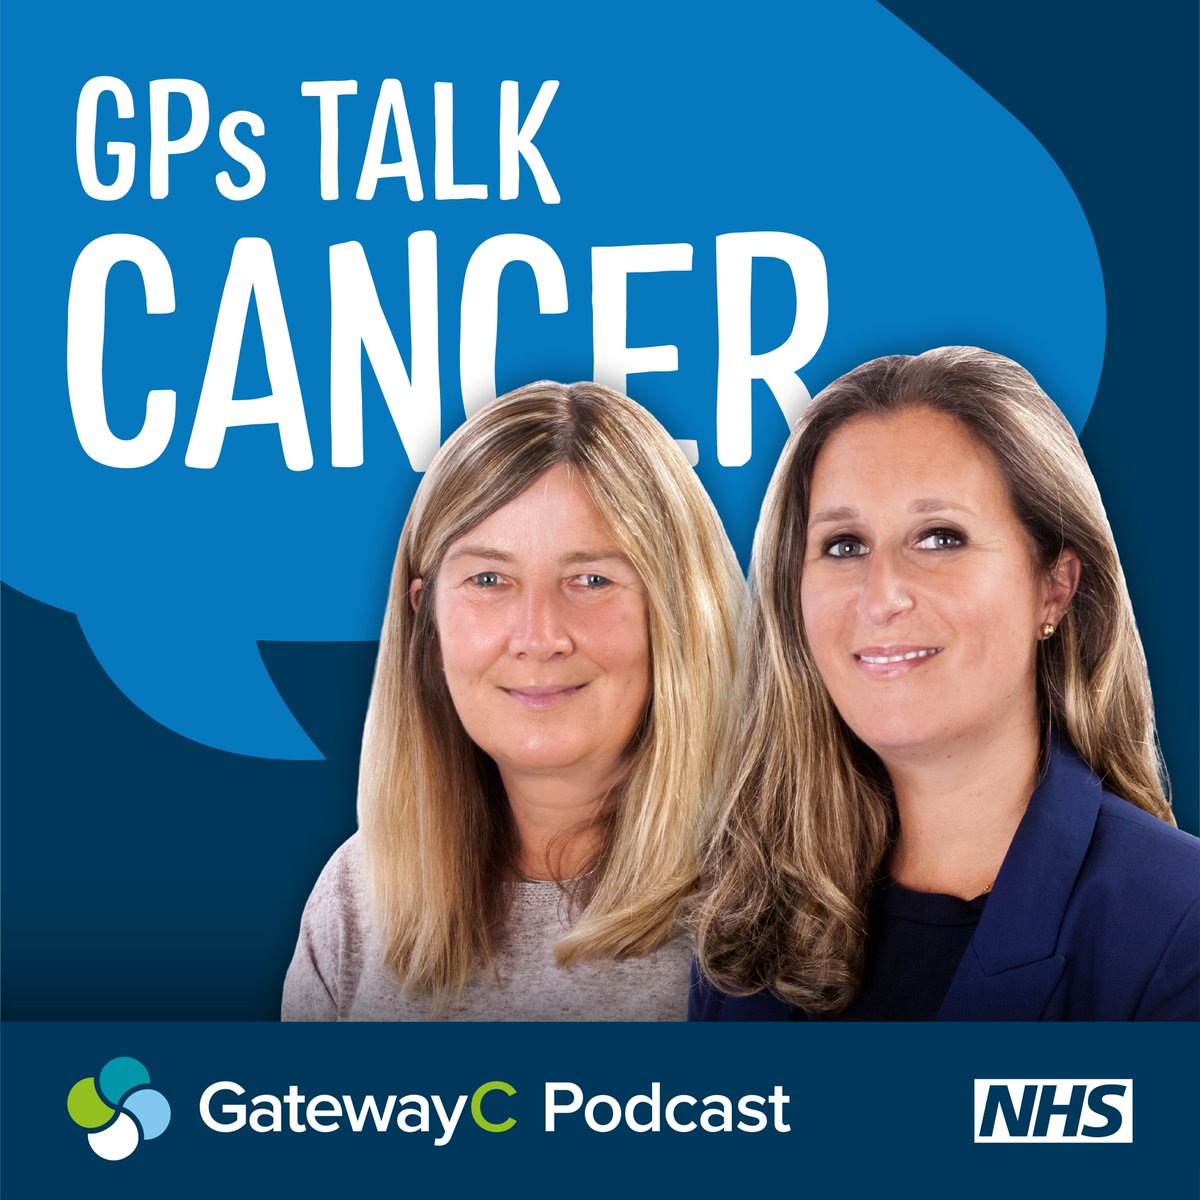 Could your patients IBS really be ovarian cancer? In our latest GPs Talk Cancer podcast episode, we cover the abdominal symptoms of ovarian cancer, IBS coding & more. Listen now 👉bit.ly/3q7Qy3Q #GPsTalkCancer #earlydiagnosis #ovariancancer